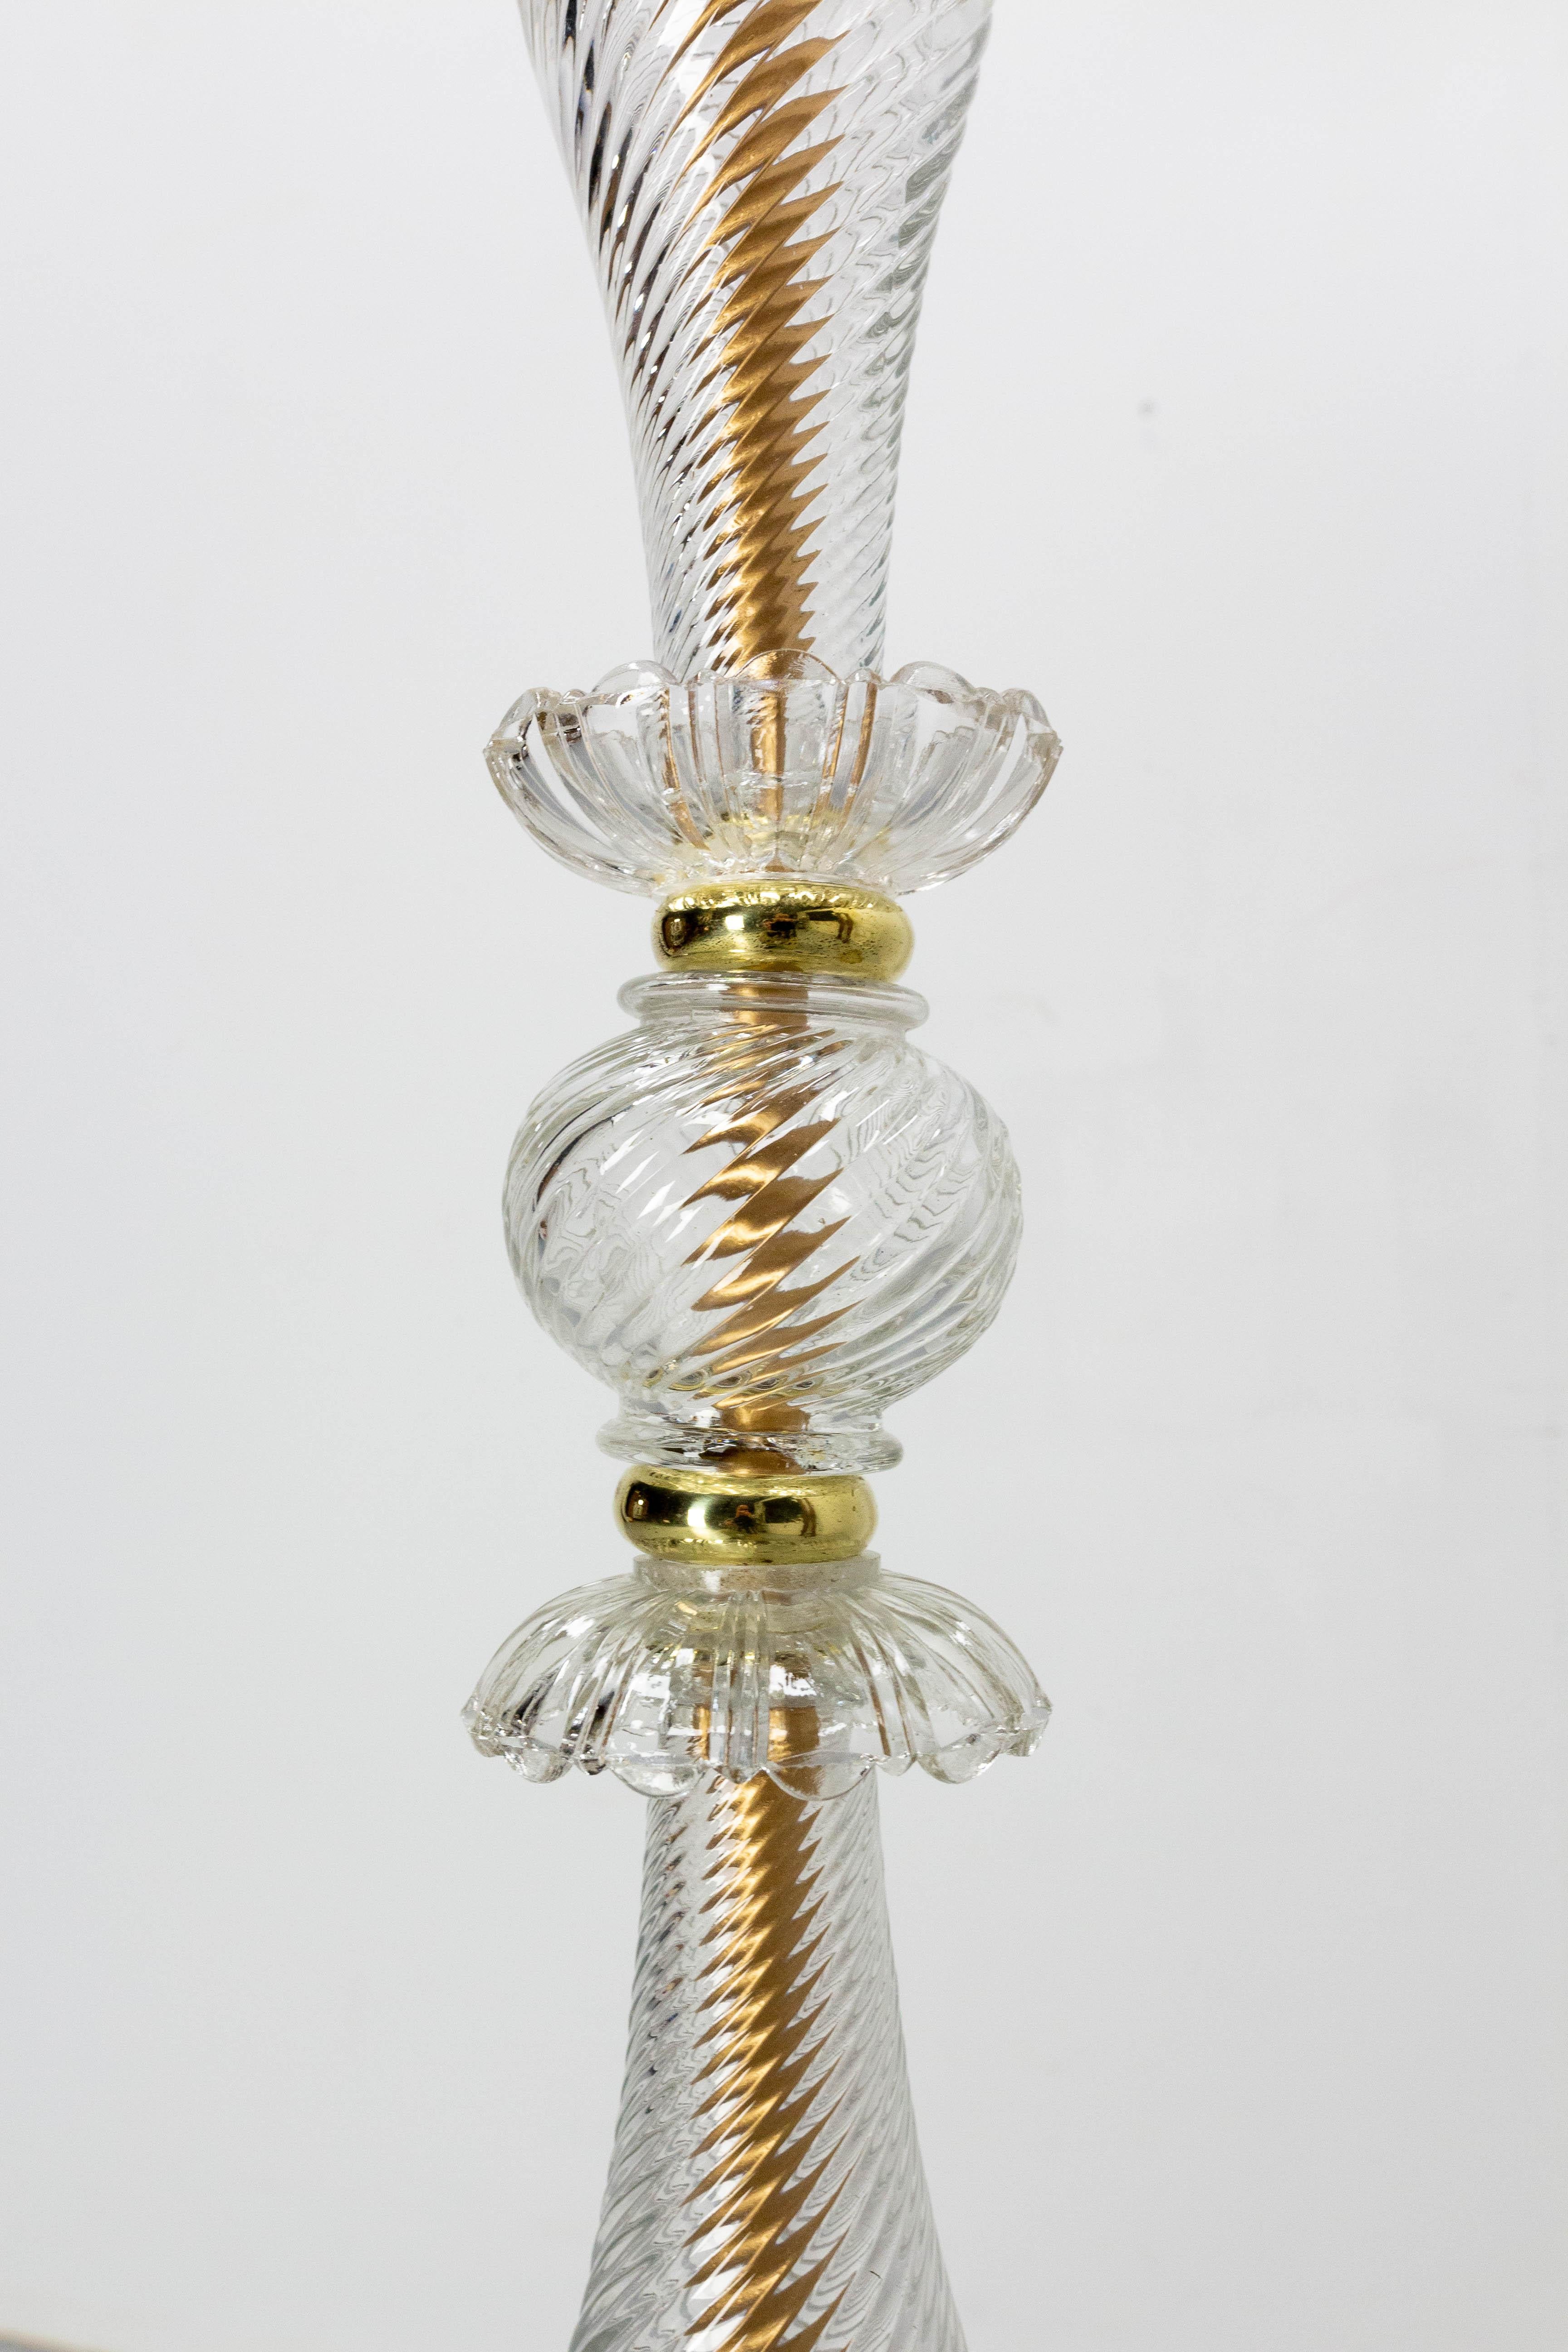 Mid-20th Century Glass & Brass Floor Lamp in the Murano Style Light Lantern, French, circa 1960 For Sale